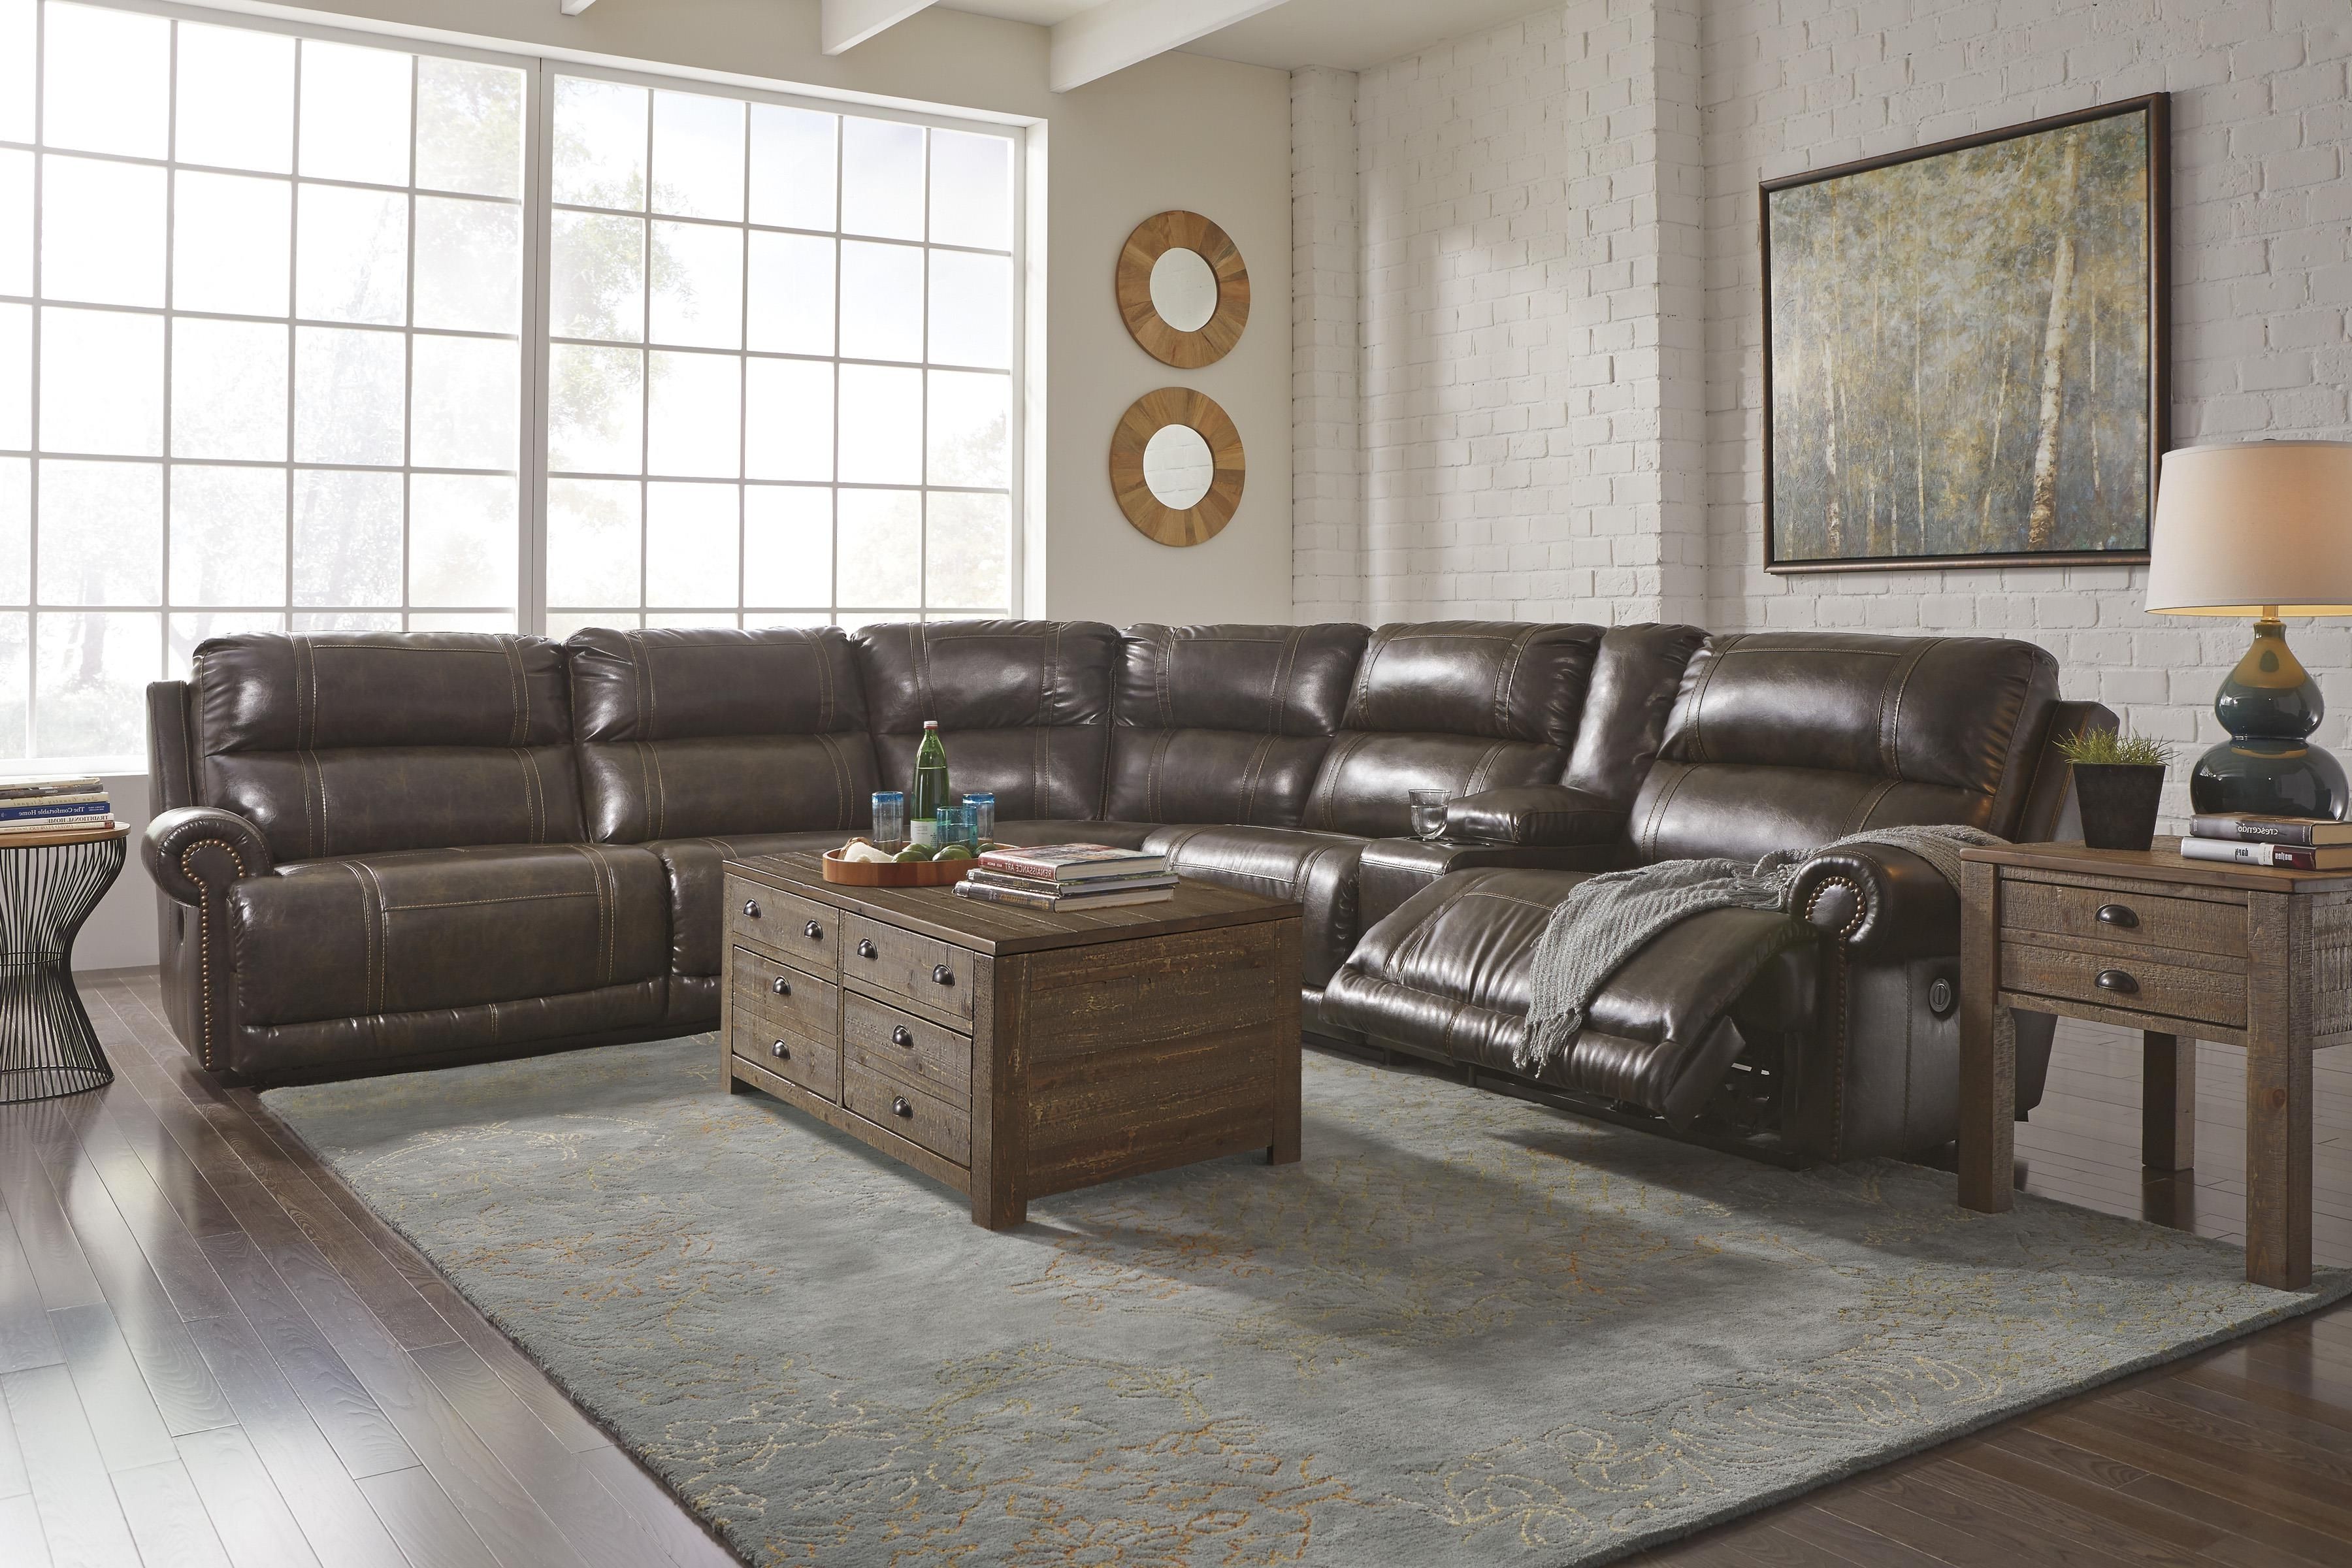 6 Piece Power Reclining Sectional With Storage Console & Armless Inside Trendy 6 Piece Leather Sectional Sofas (Photo 5 of 15)